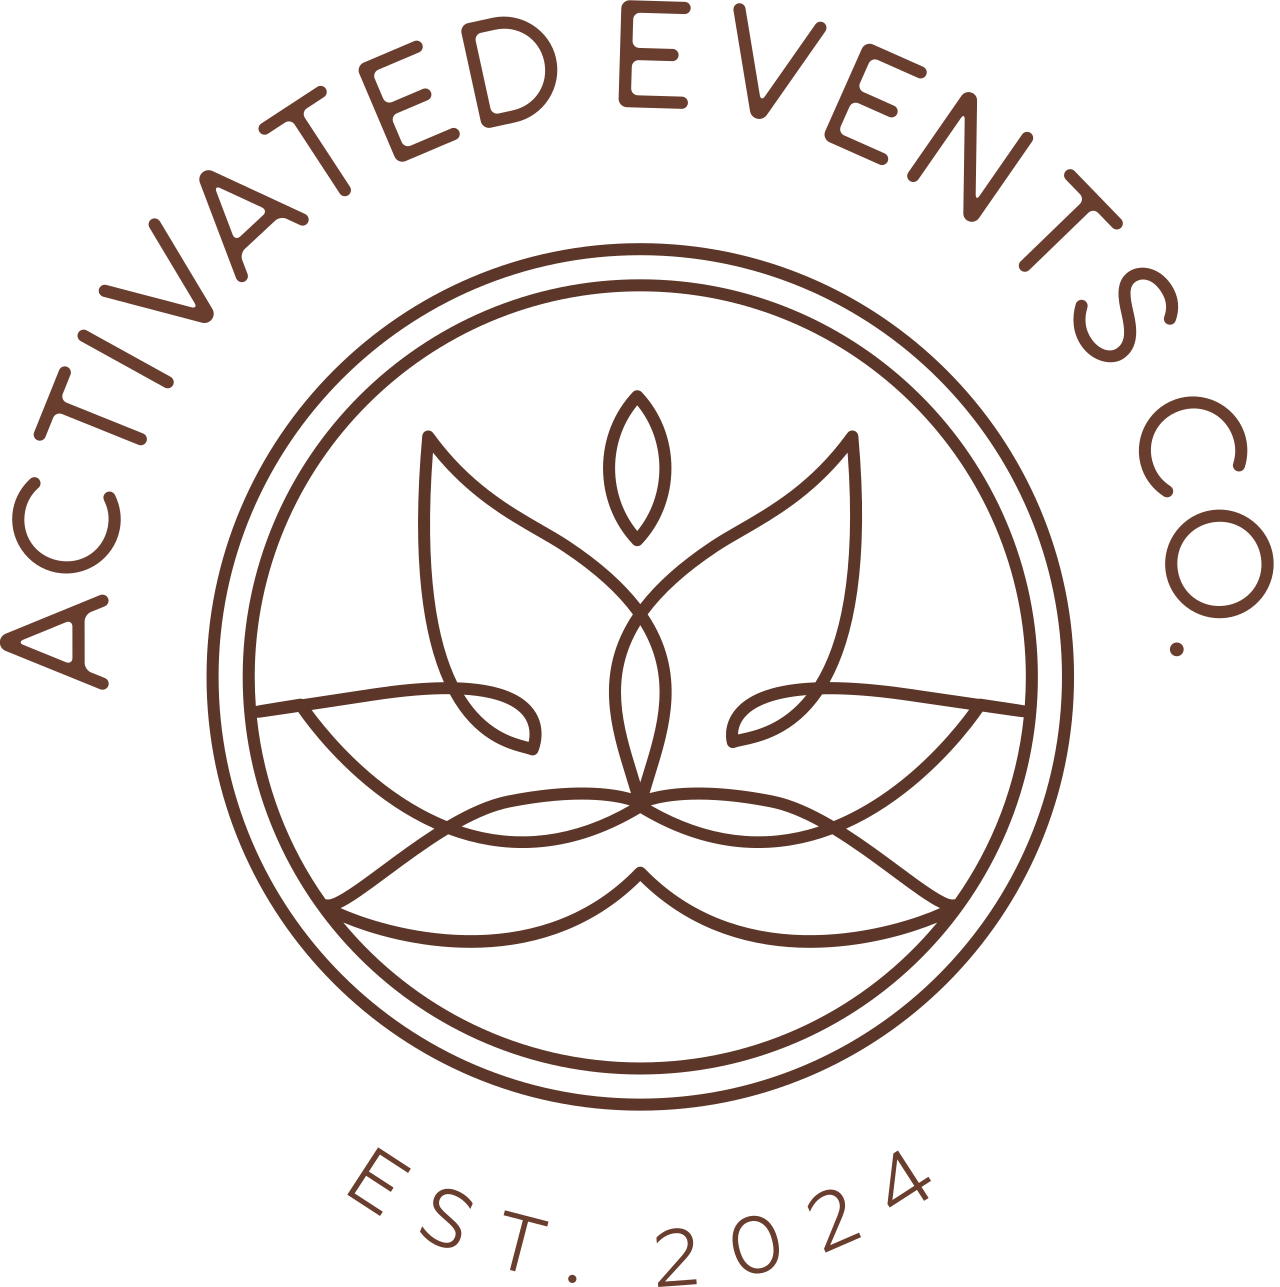 ACTIVATED EVENTS CO. 's logo